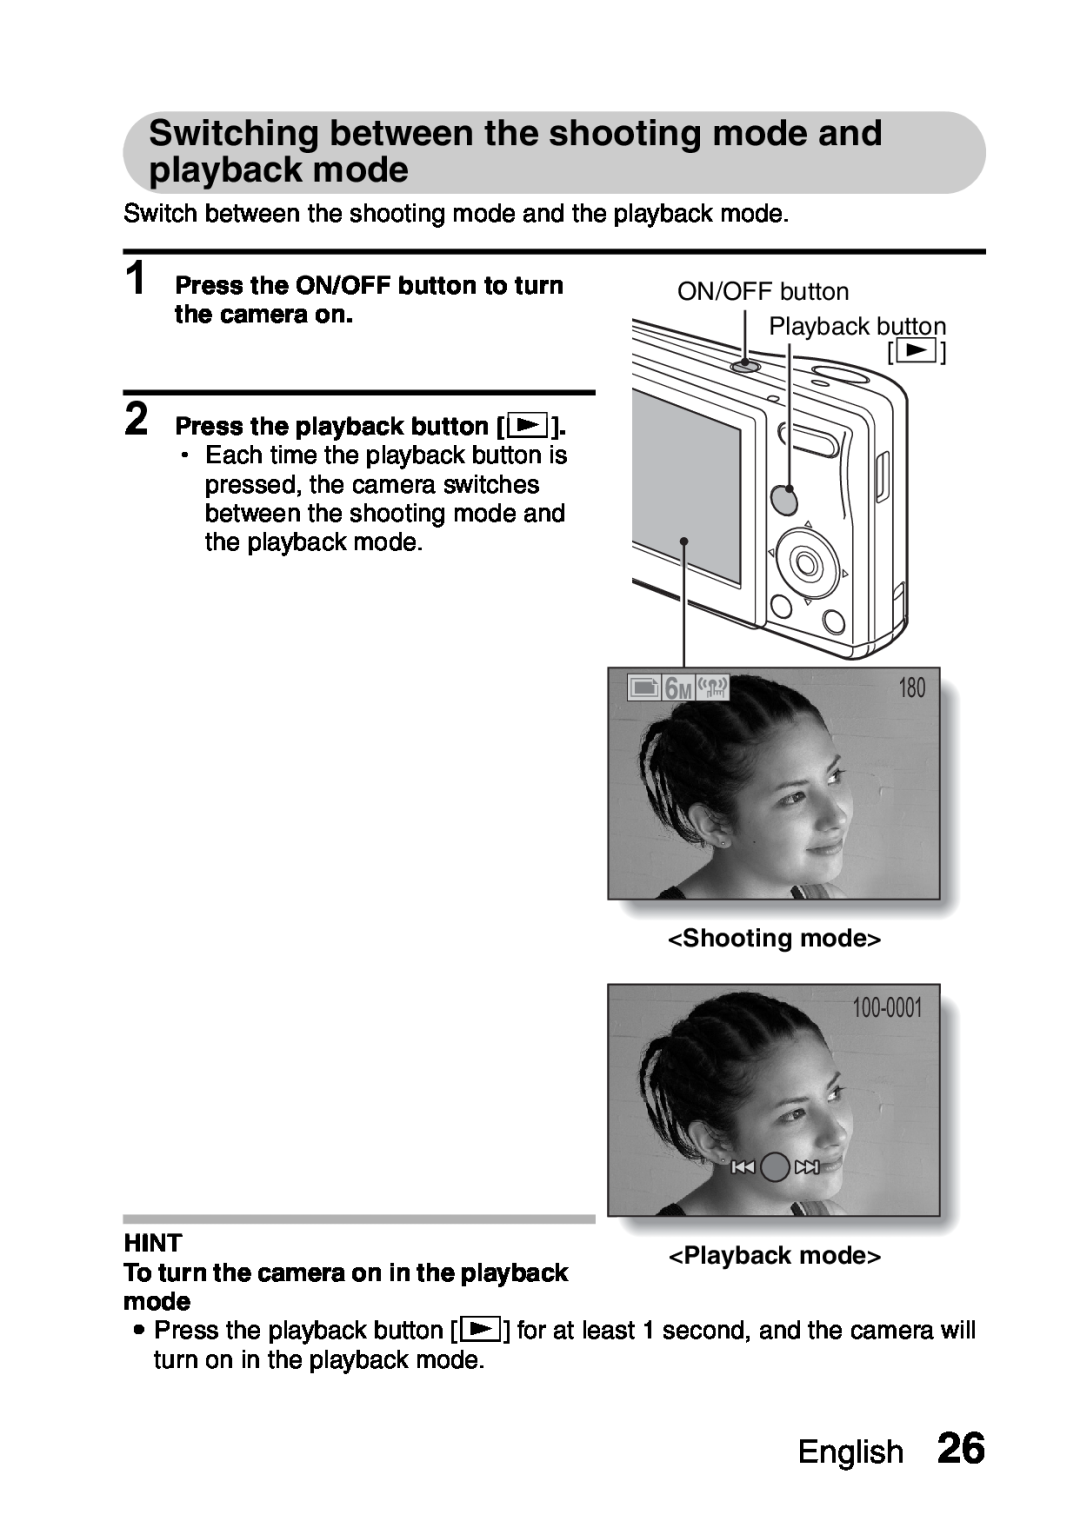 Sanyo VPC-S60 Switching between the shooting mode and playback mode, 100-0001, Press the playback button =, English 